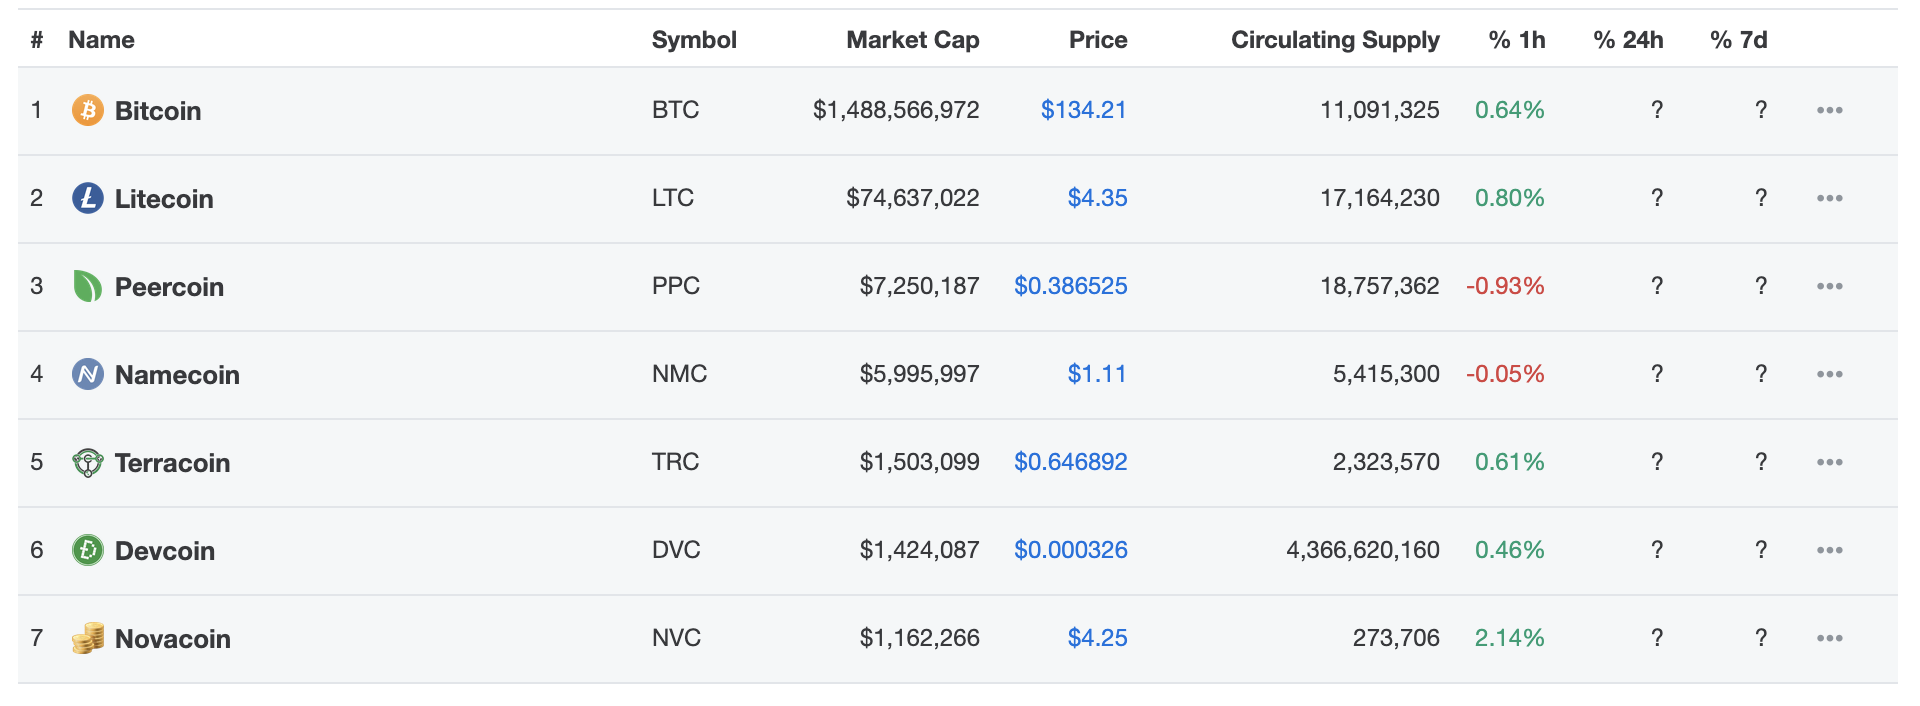 Historically first snapshot of coinmarketcap from April 28th, 2013.